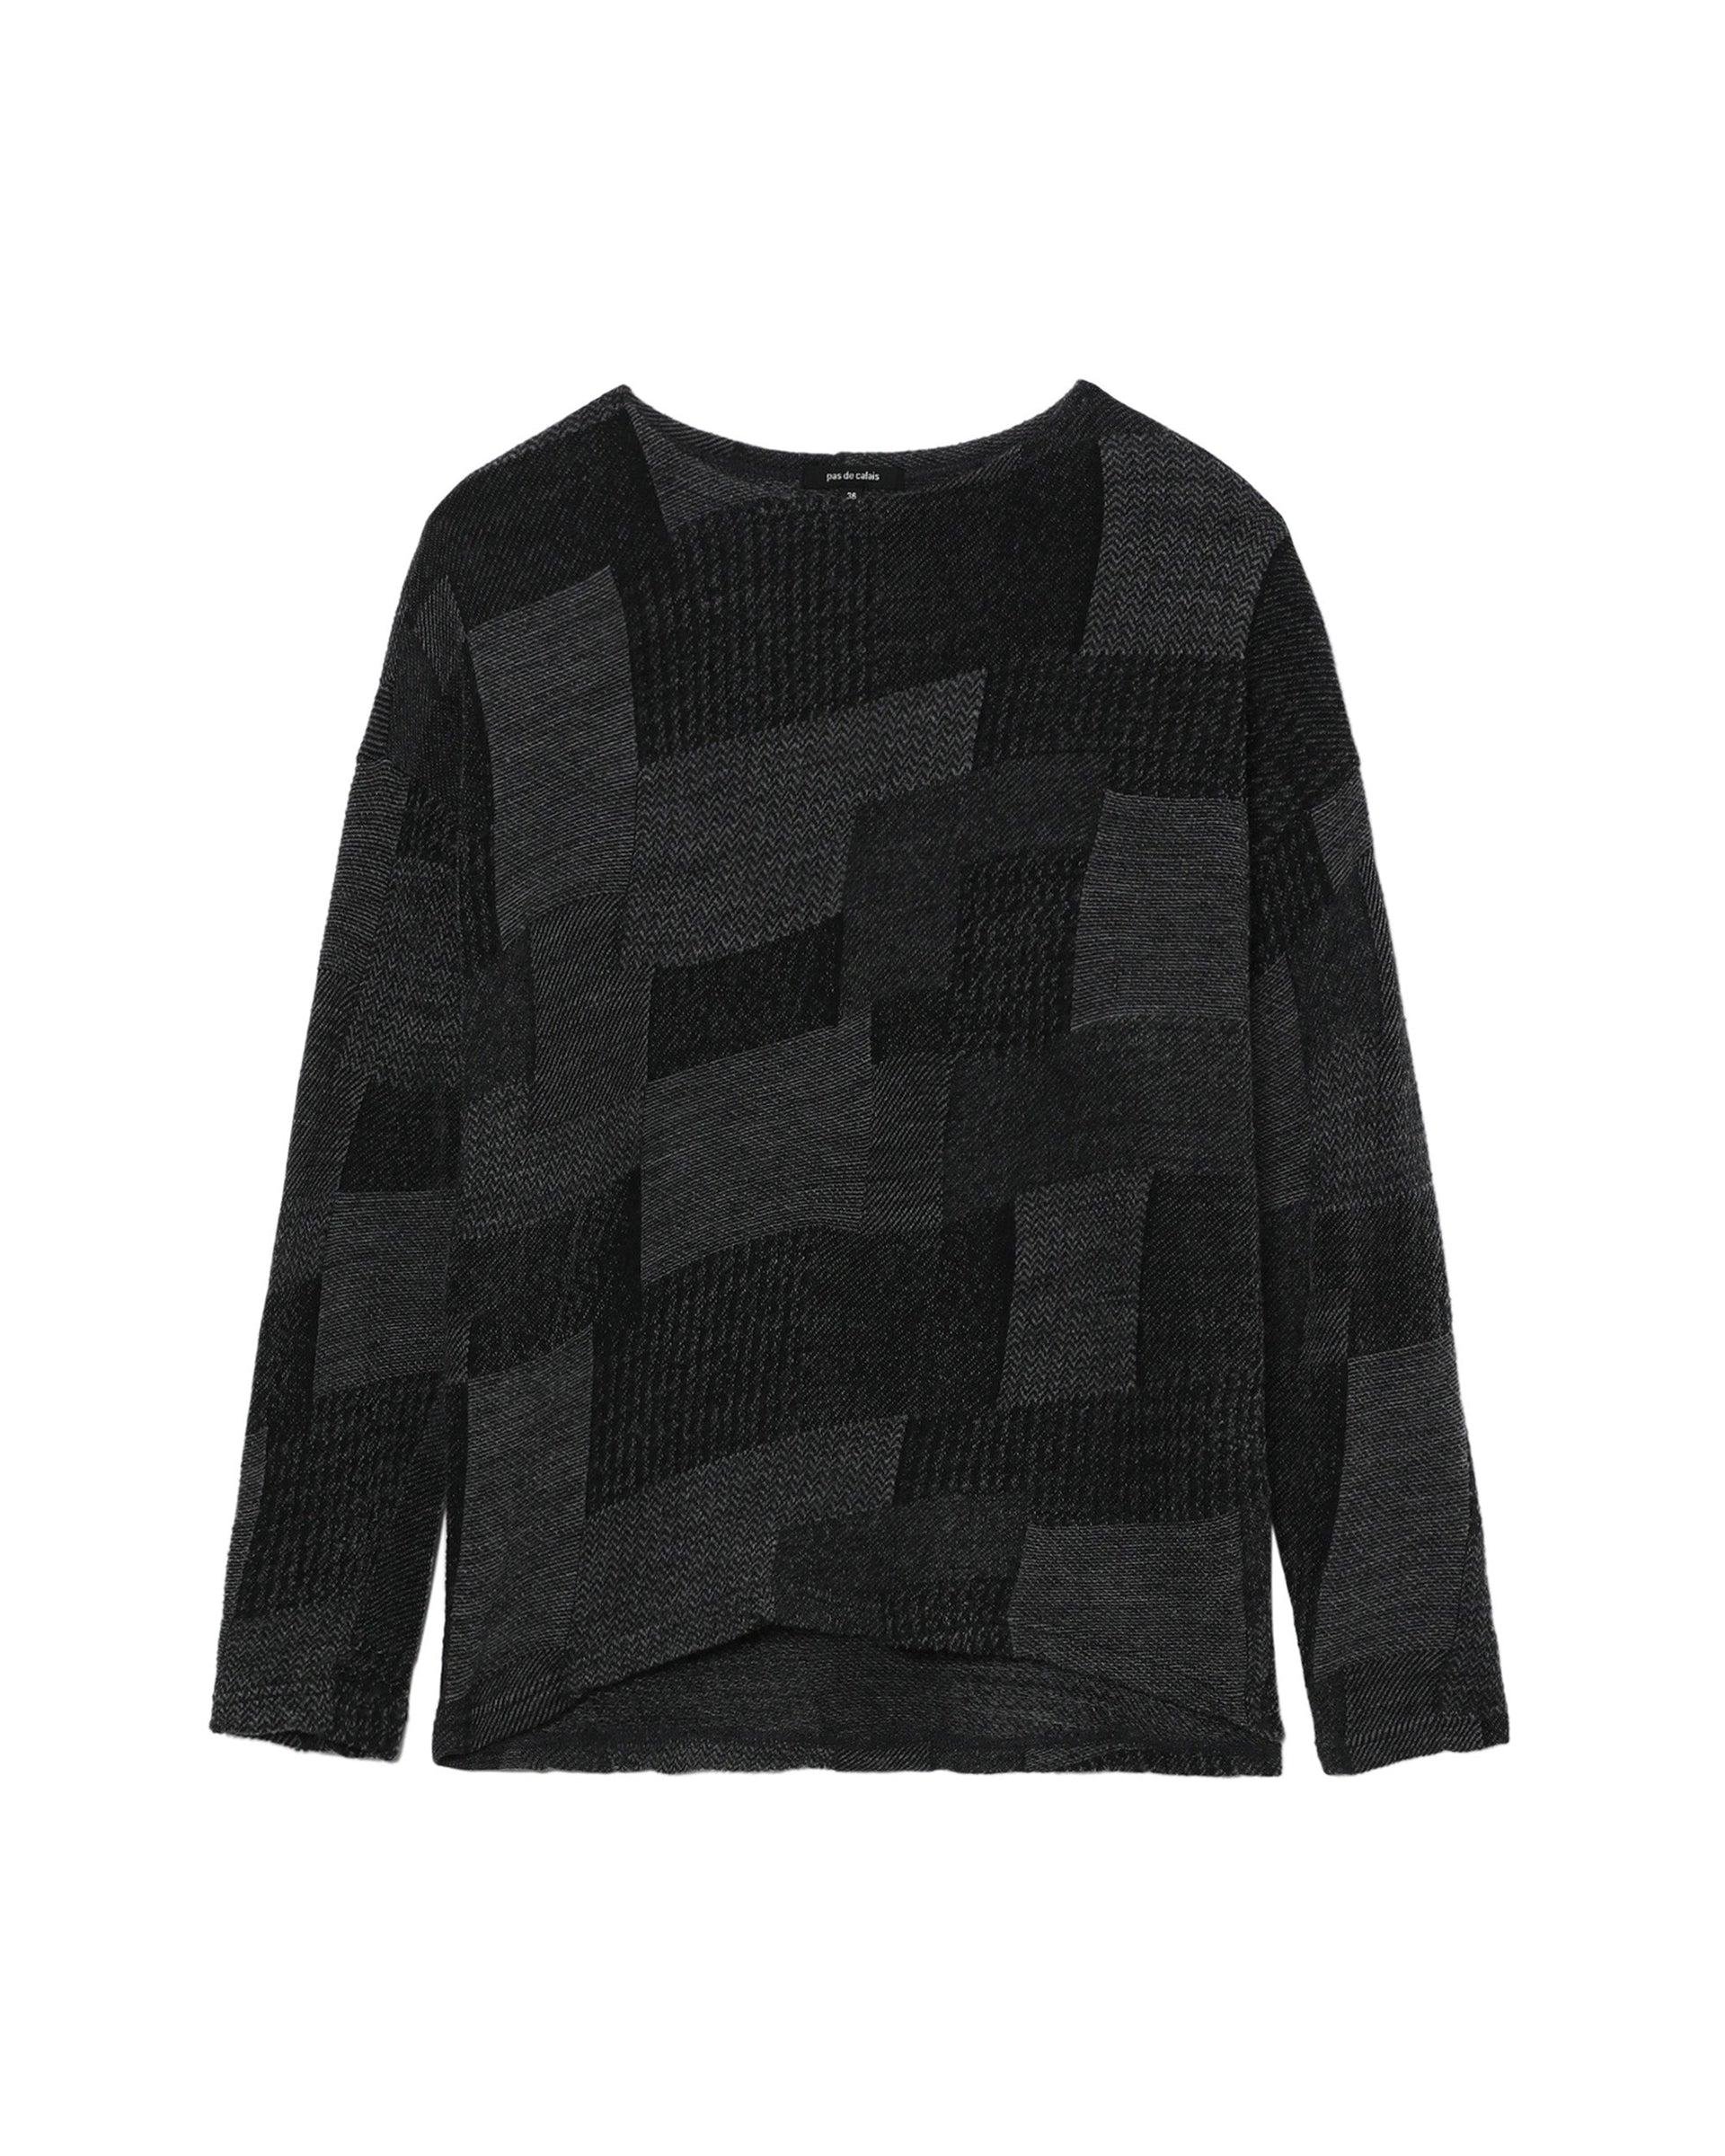 PAS DE CALAIS Dobby Check Print Wool Jersey by COCKTAIL